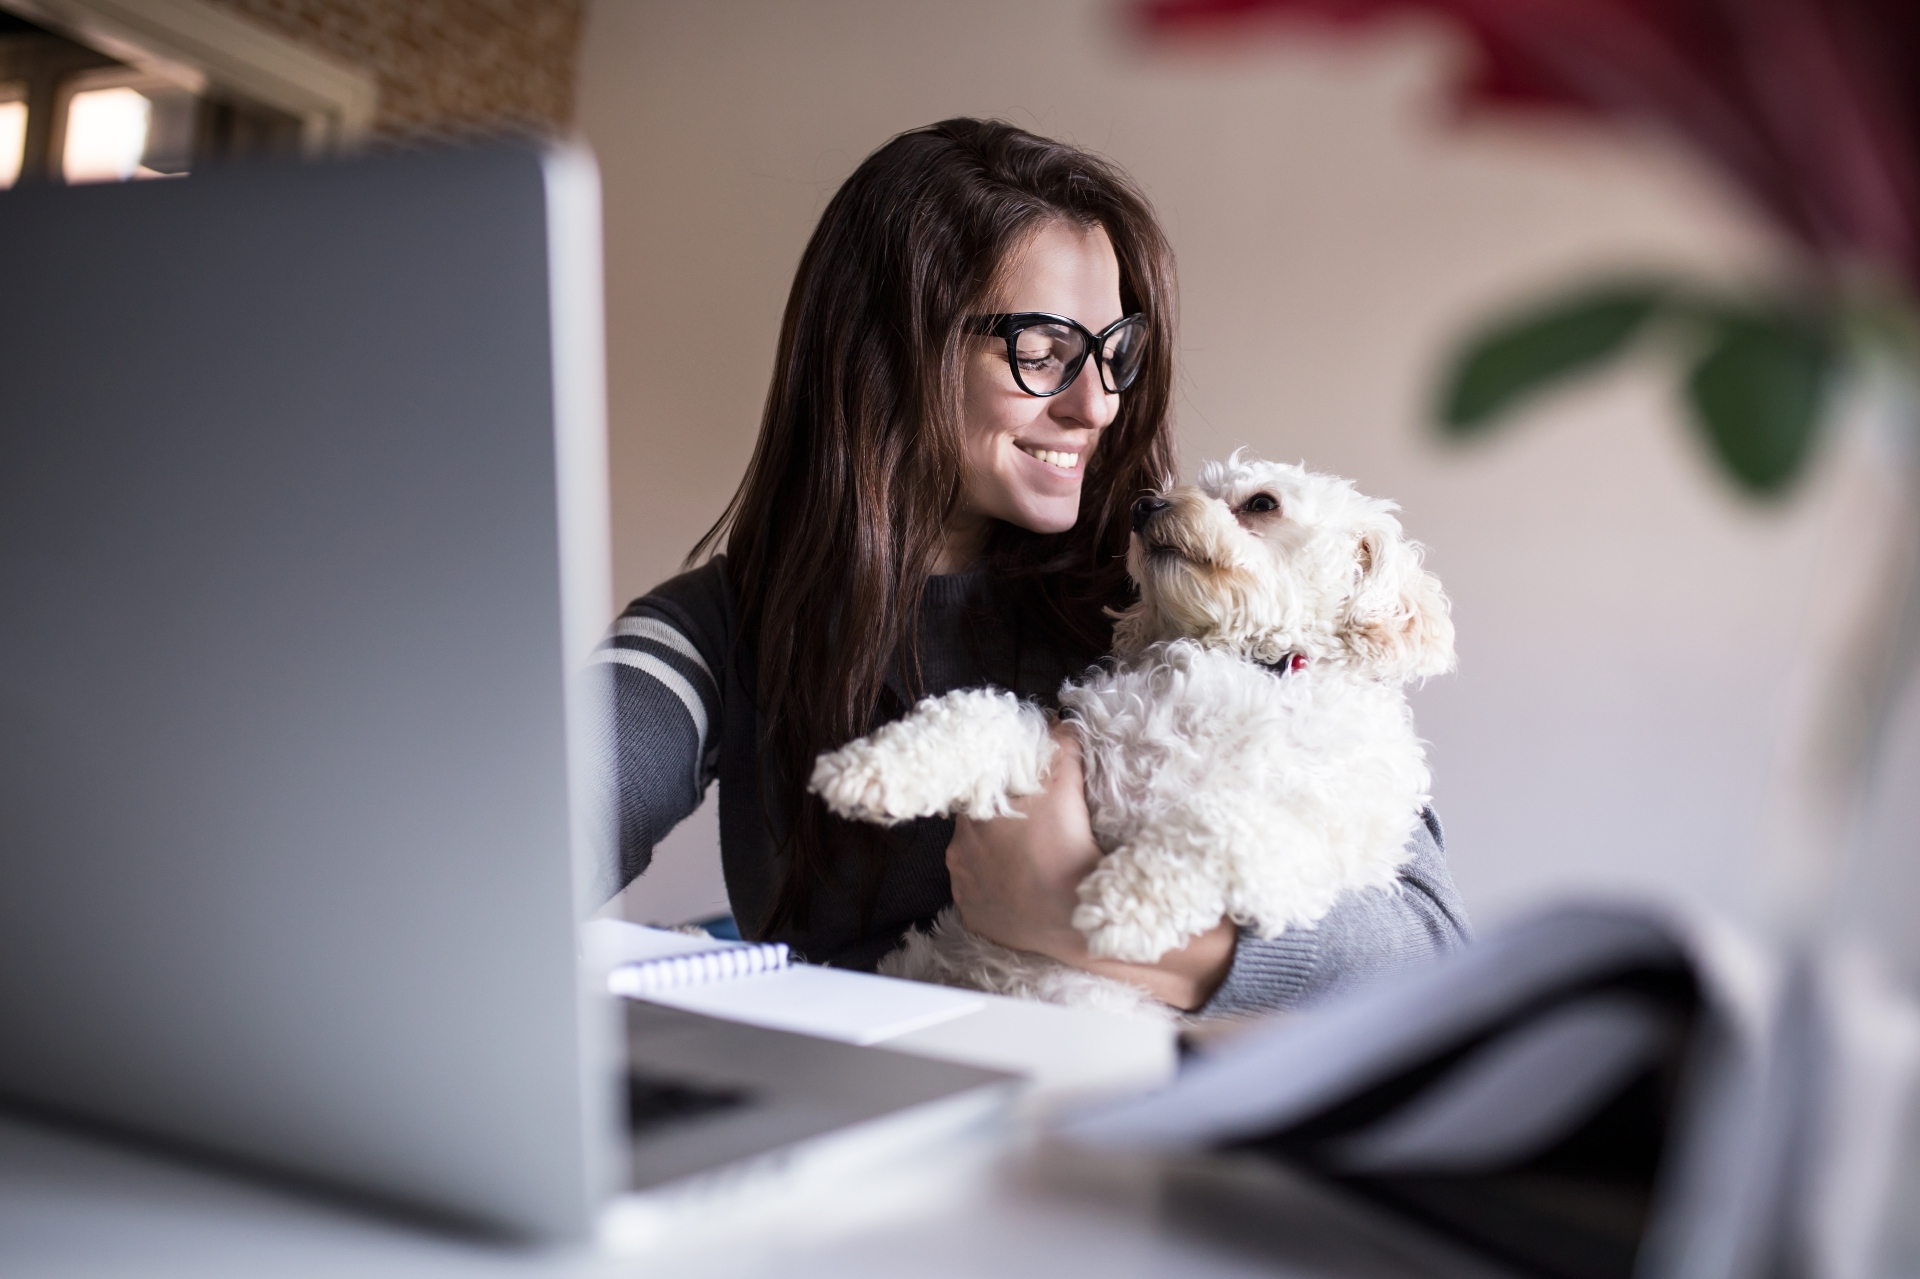 Many employees love bringing their pets to work.